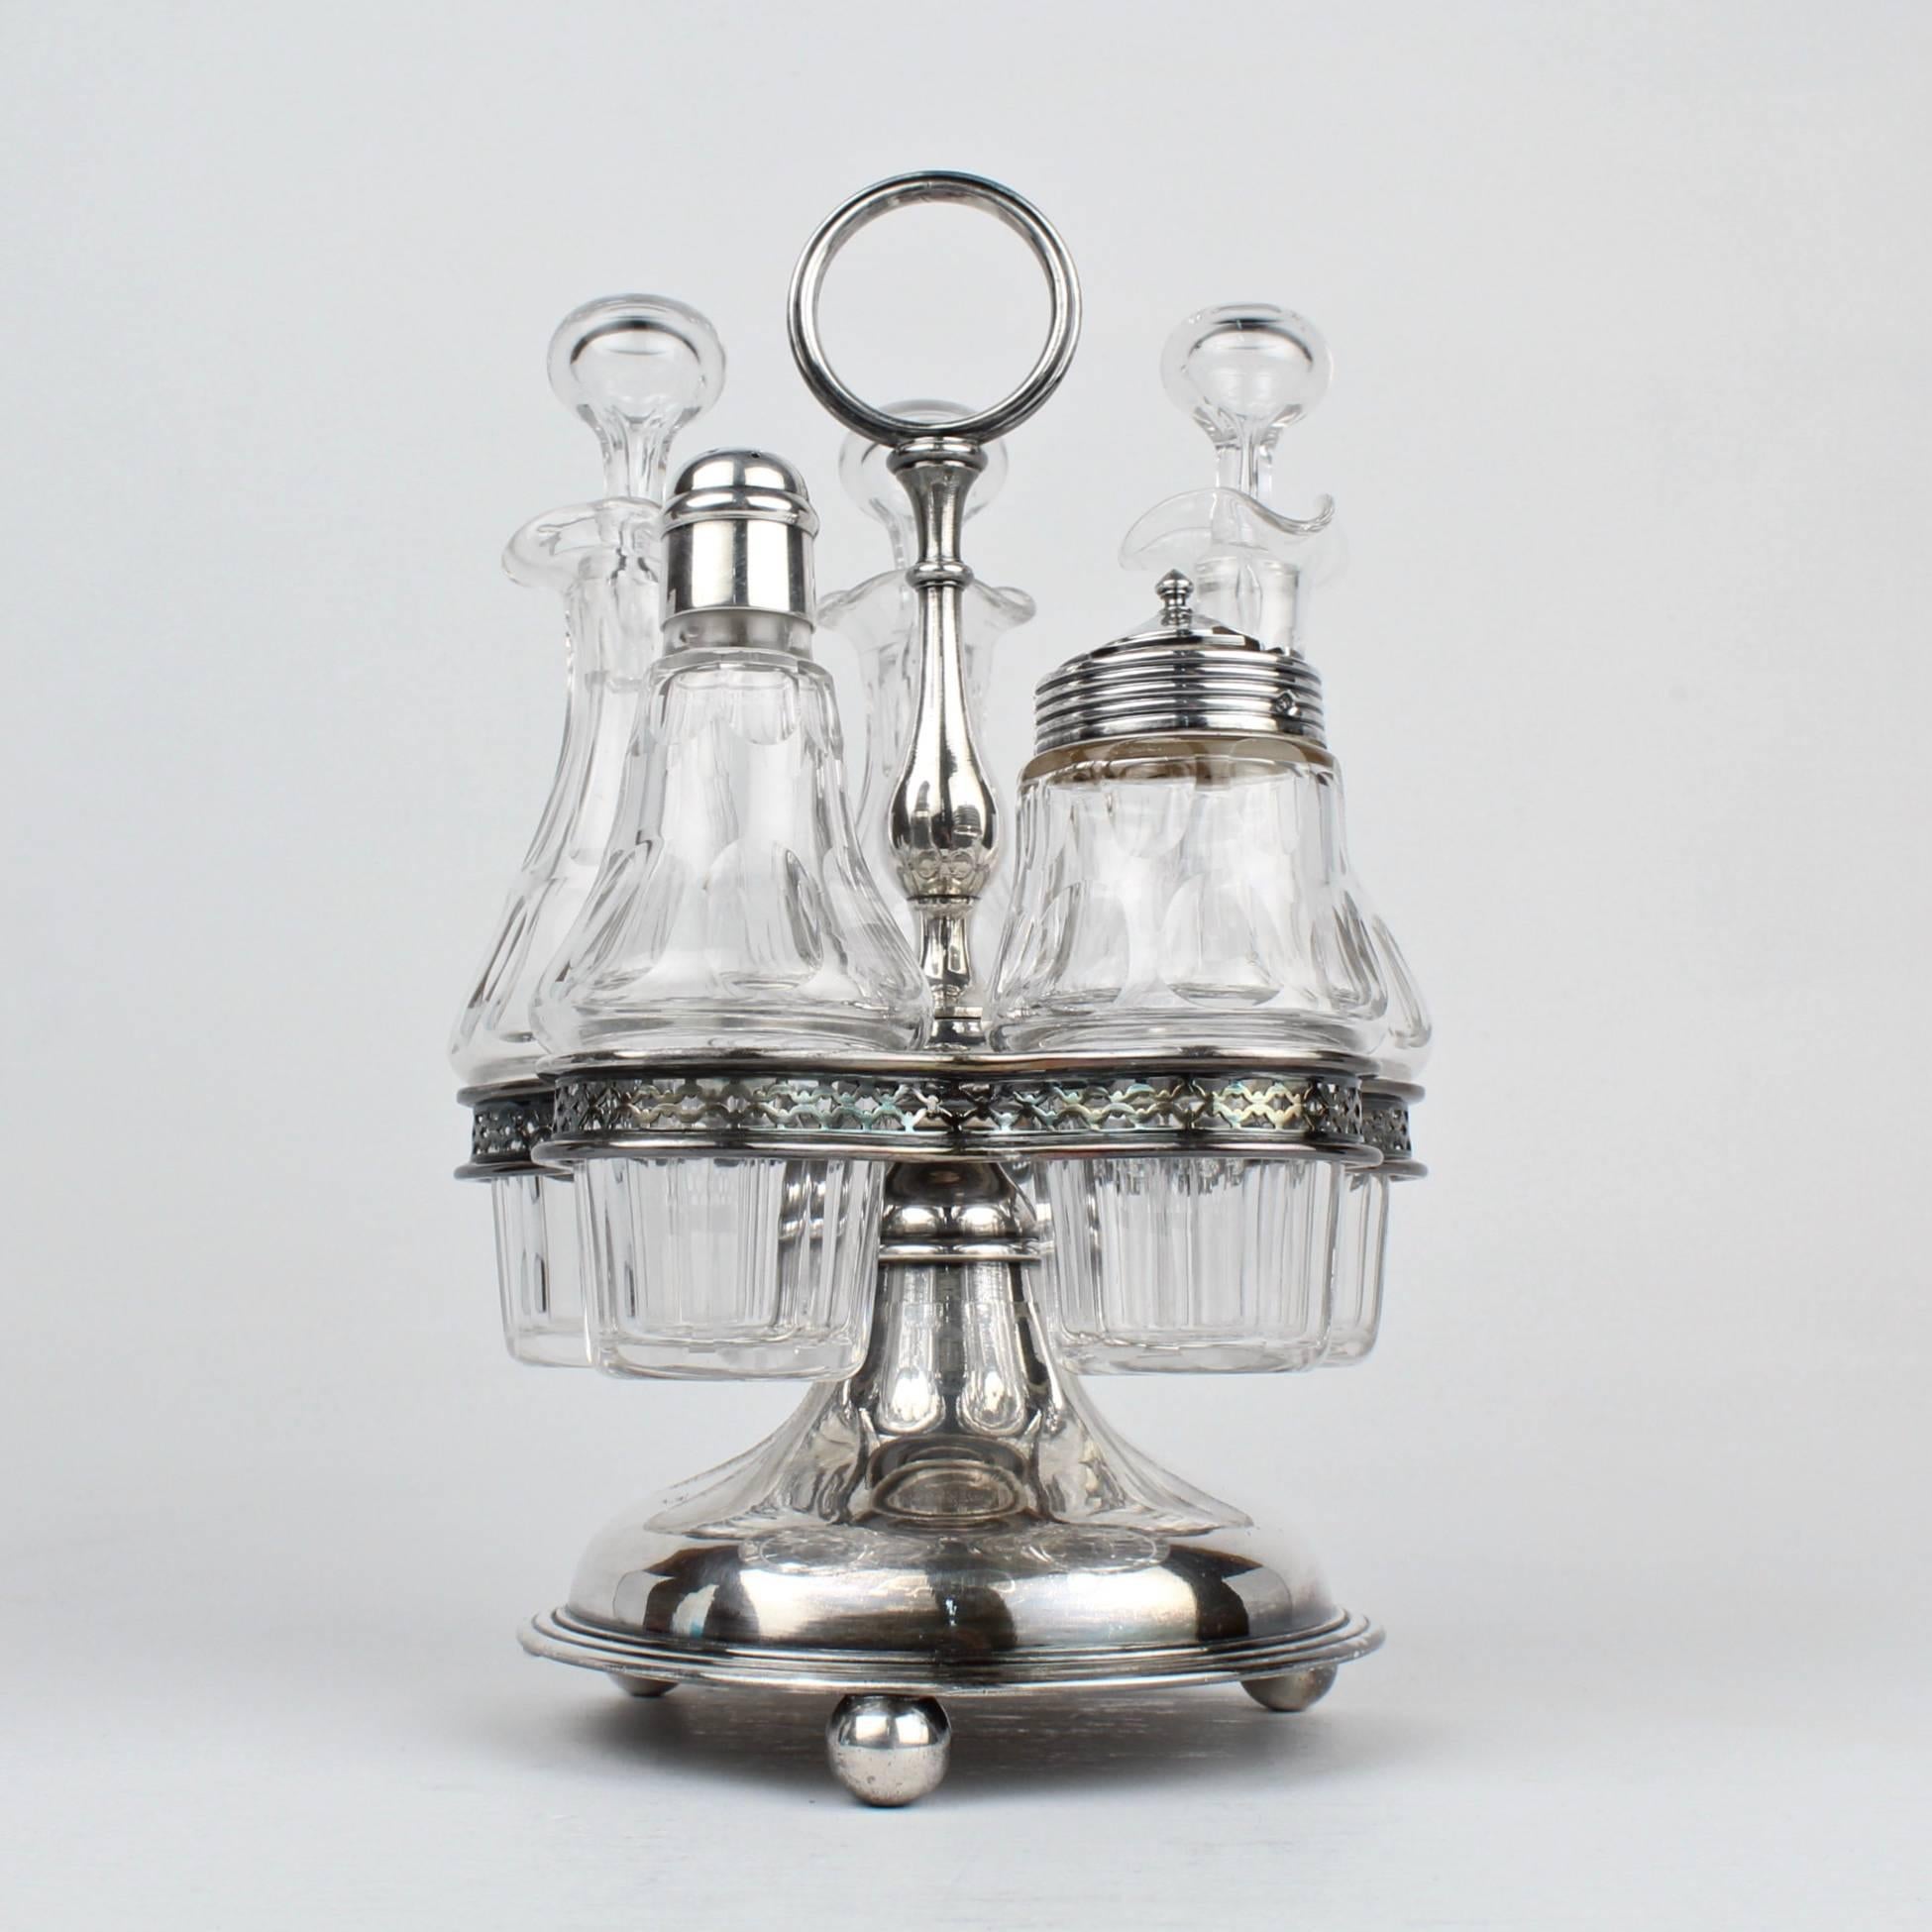 A rare Christofle cruet stand for oil, vinegar, and other condiments.

Its ball feet and a plunger base support a pierced galley that holds faceted Baccarat crystal bottles. Three bottles have stoppers, the fourth a shaker top, and the fifth is